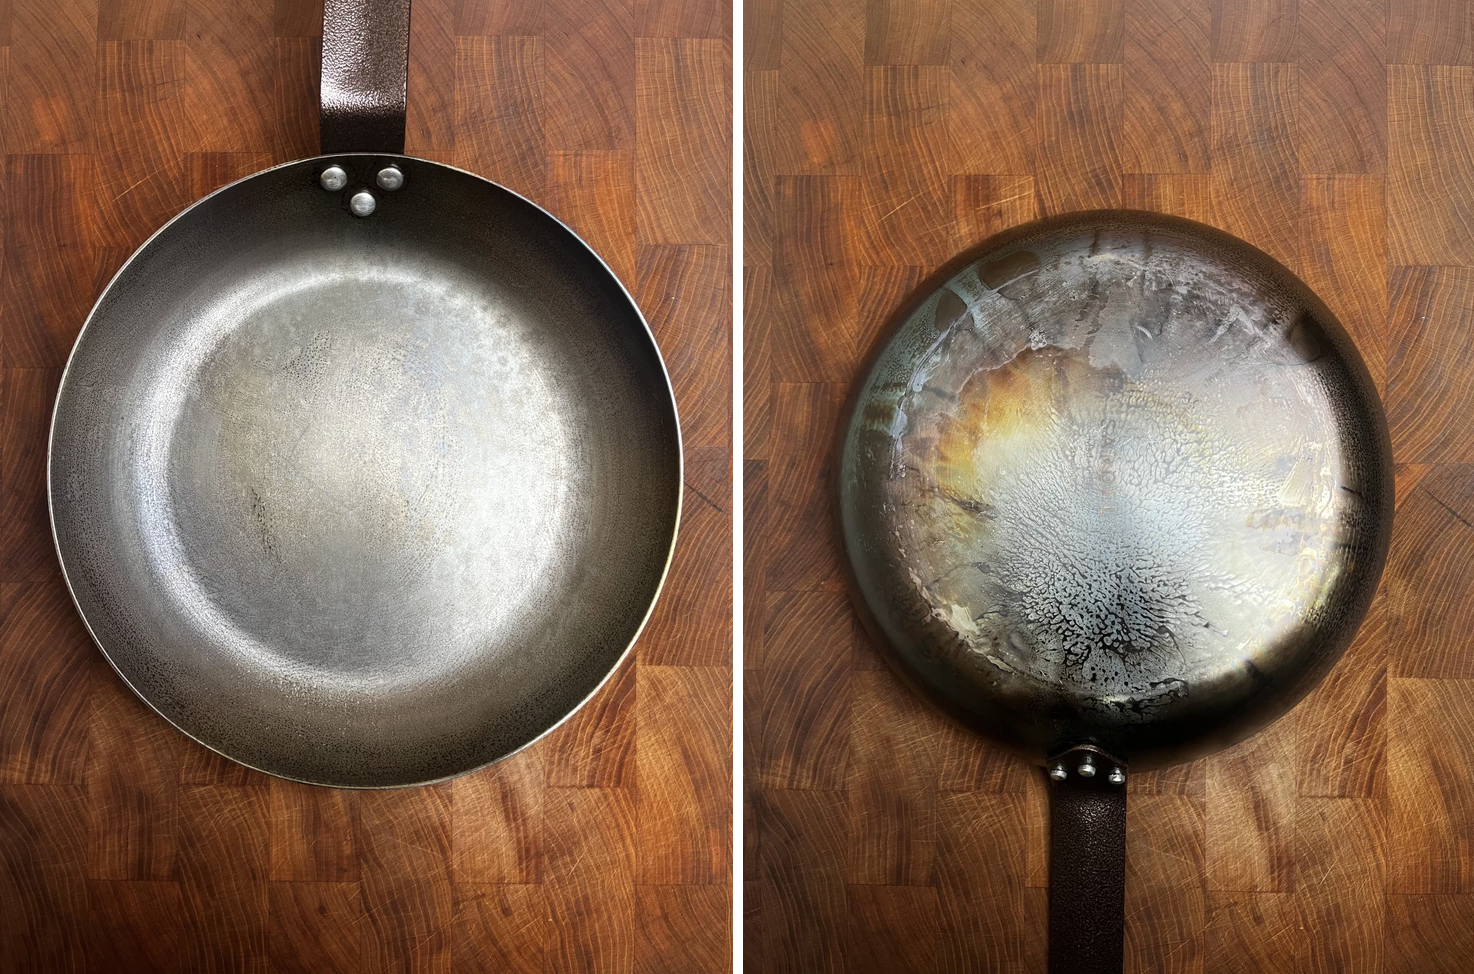 How to Season Carbon Steel Pan Like a Pro - 6 Easy Steps!